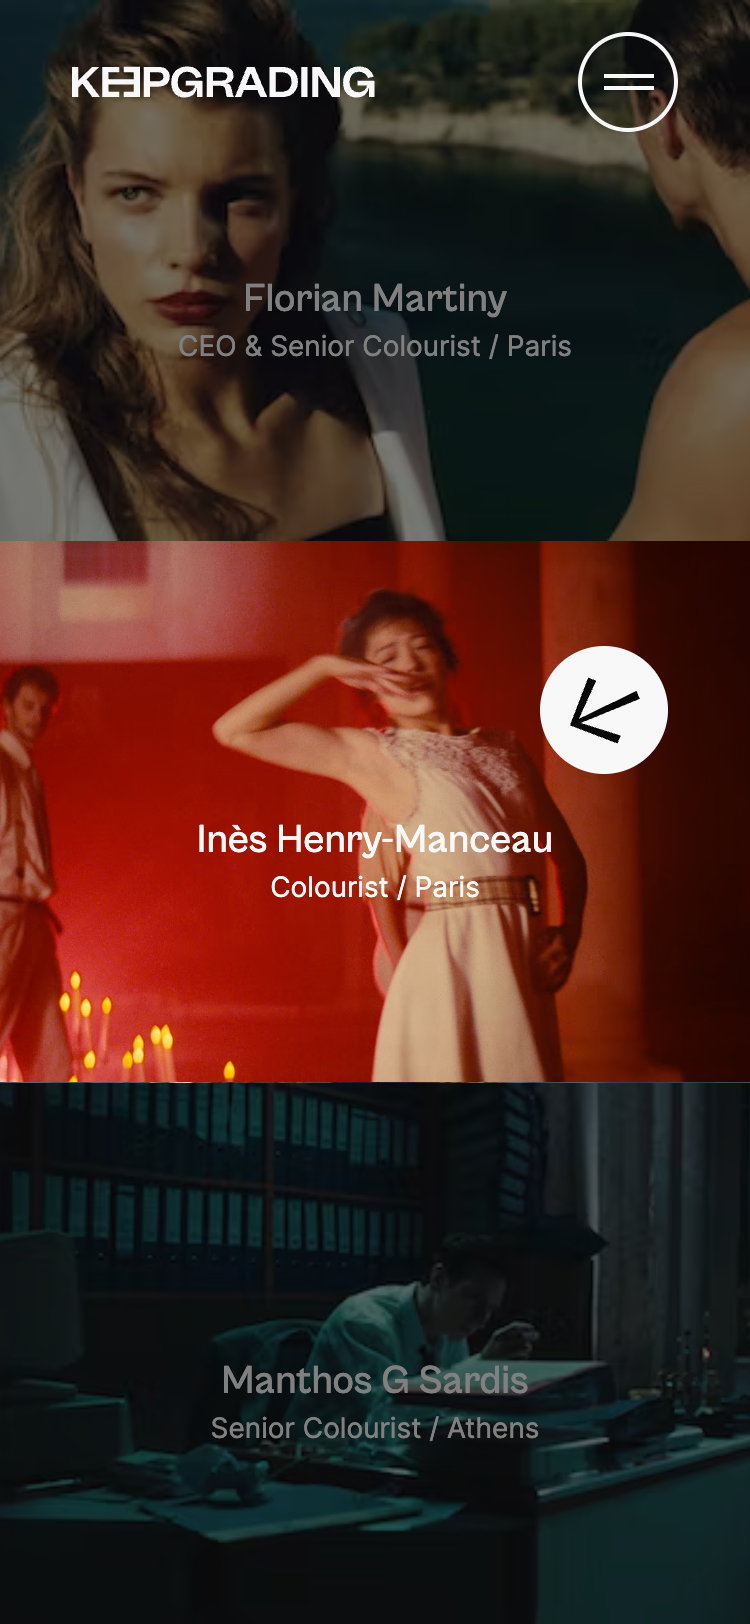 Mobile screenshot of the 'Colourists' page of the KeepGrading website. The header contains the KeepGrading logo and a menu button. The colourists are listed with their roles and location, with background images showcasing their work.